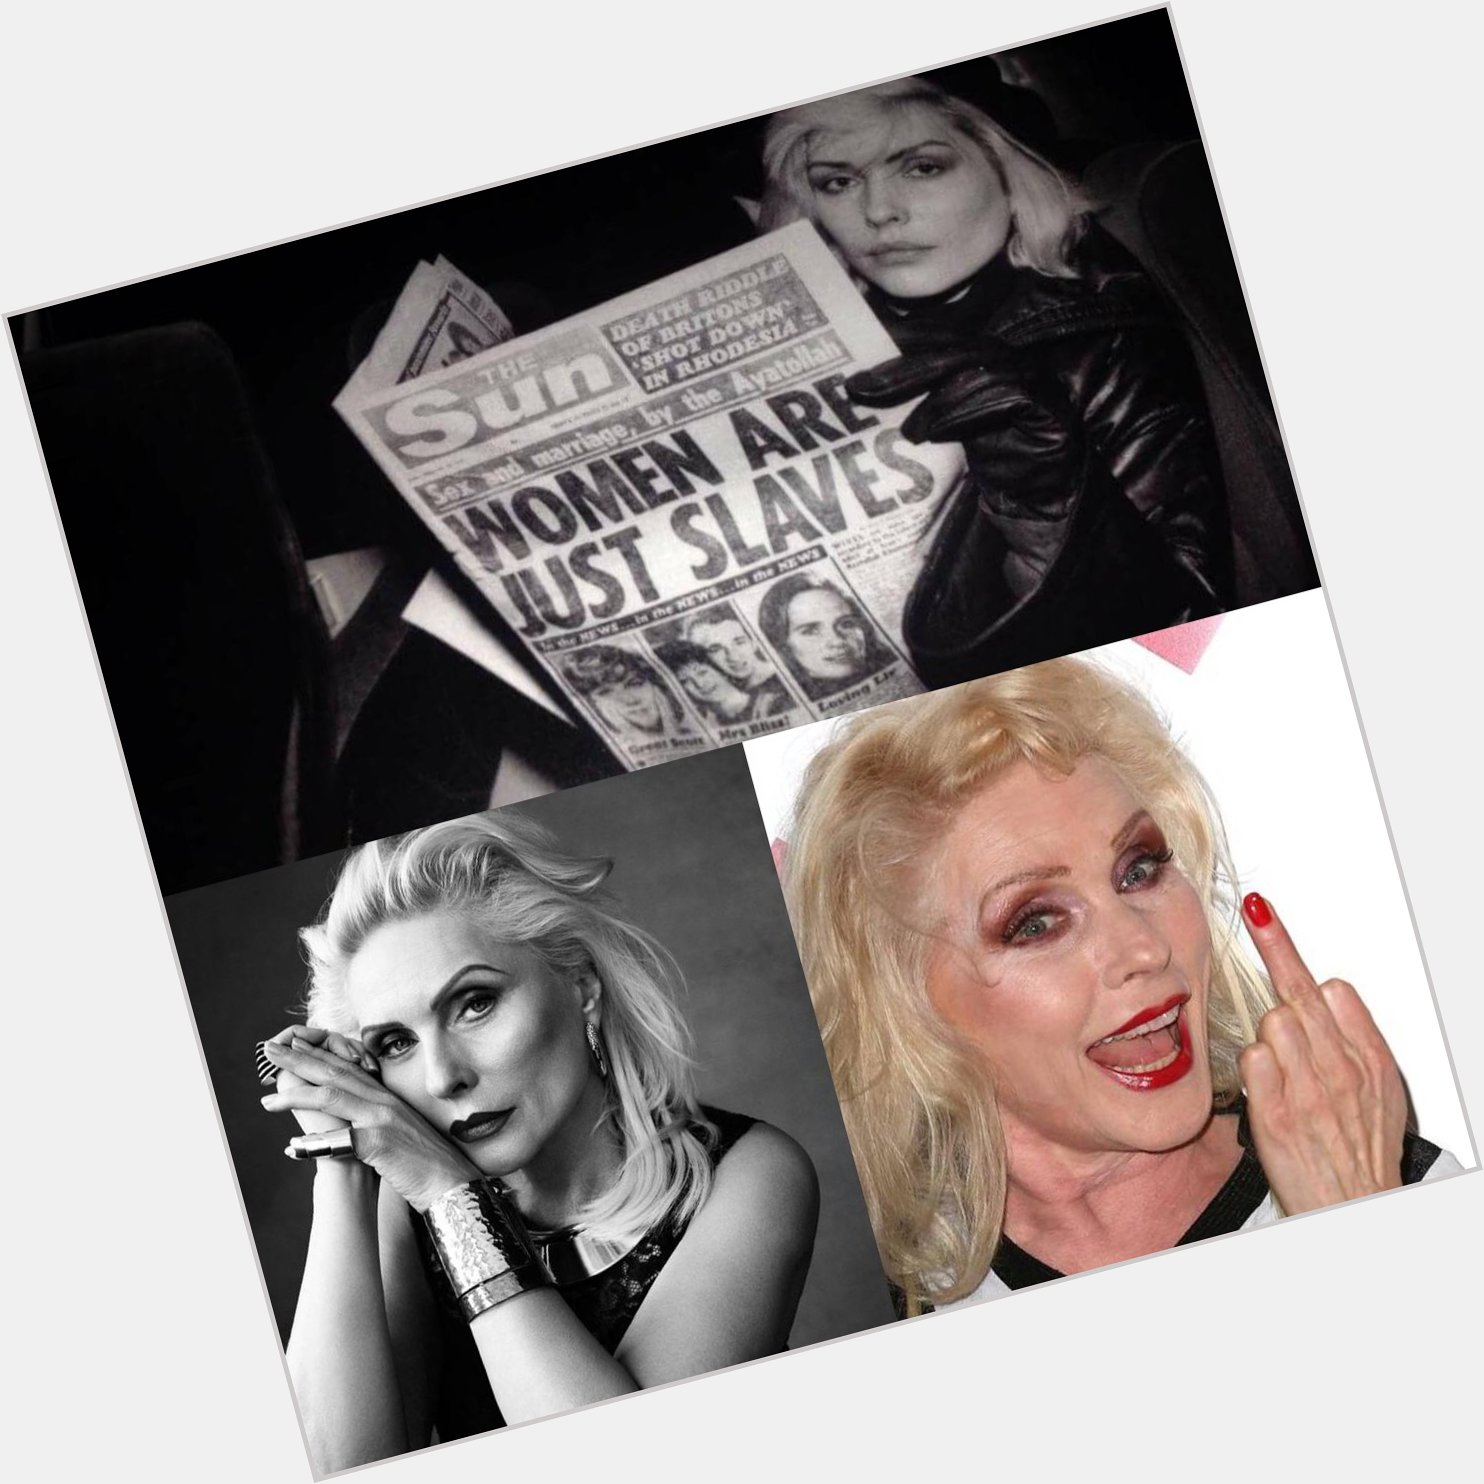 Happy Birthday, Debbie Harry. 70 and stunning! What a woman. 